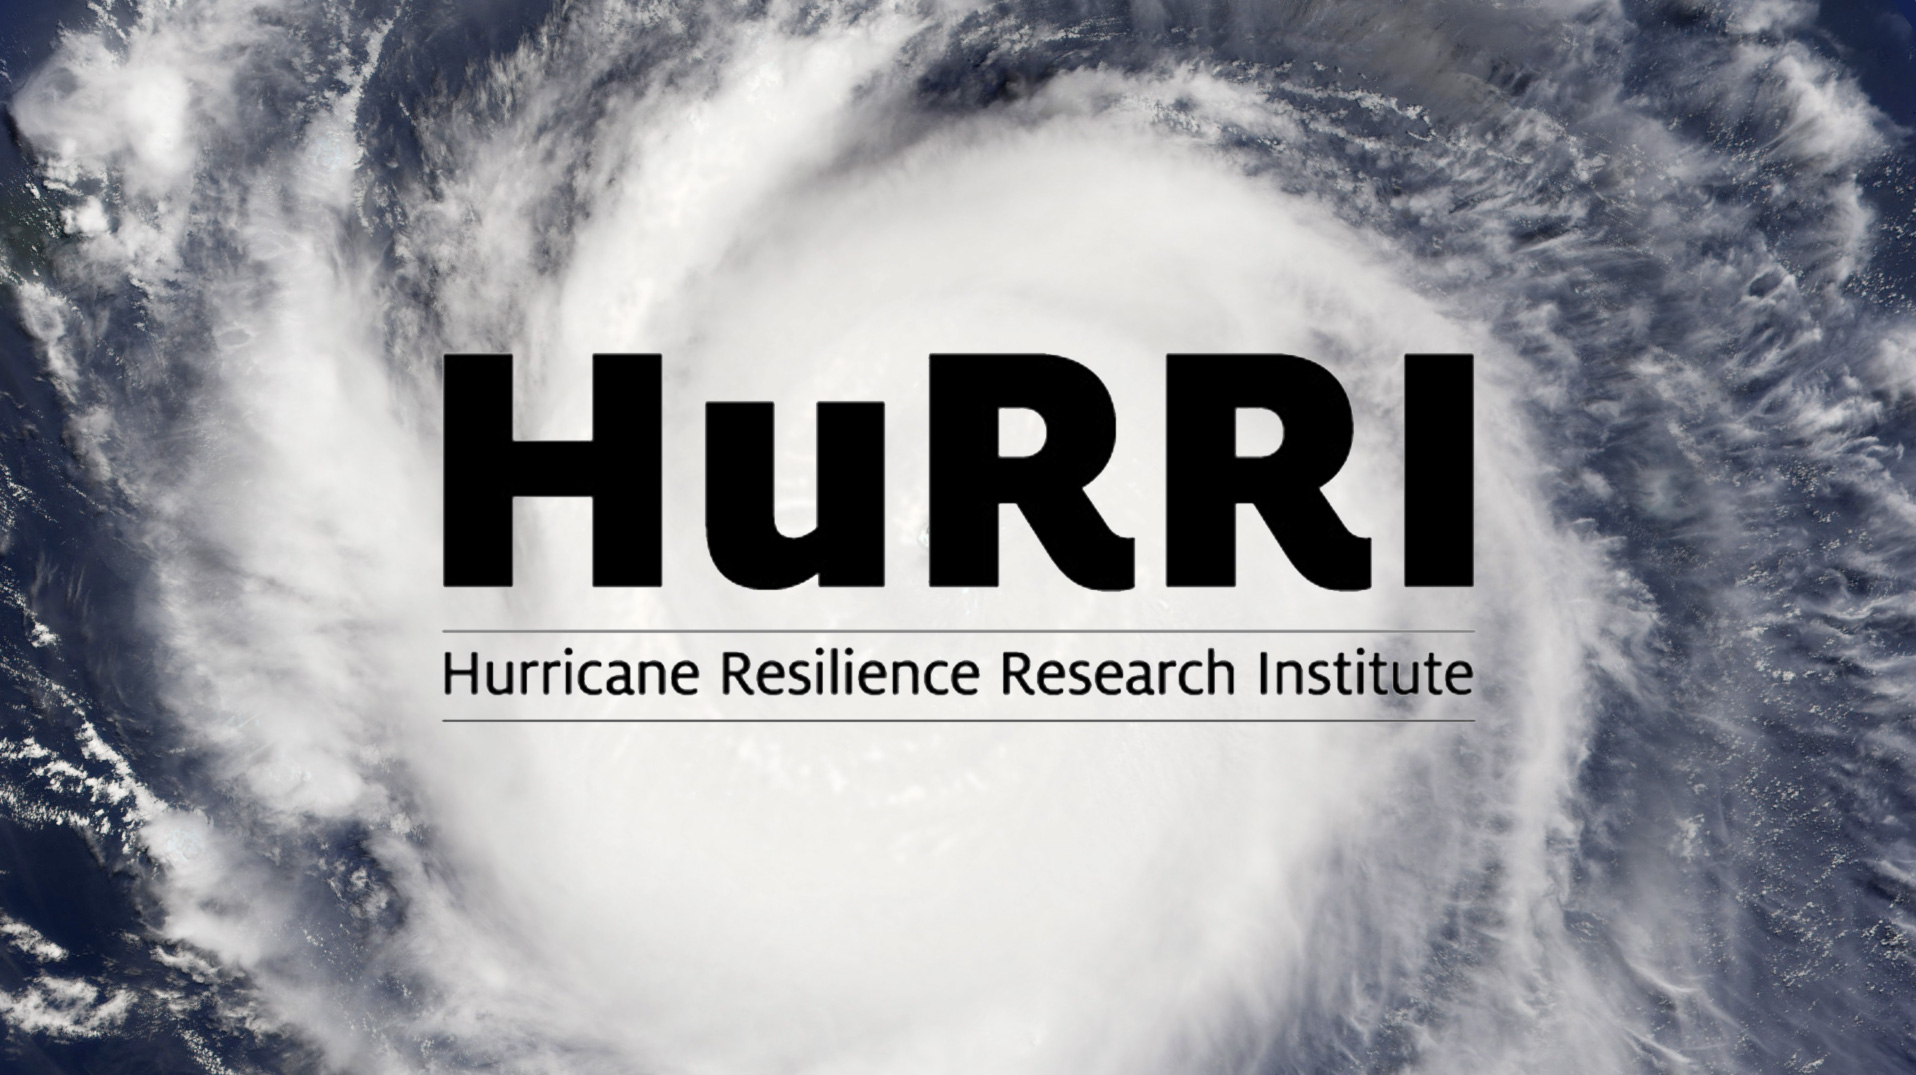 hurricane satellite image, logo that reads Hurricane Resilience Research Institute